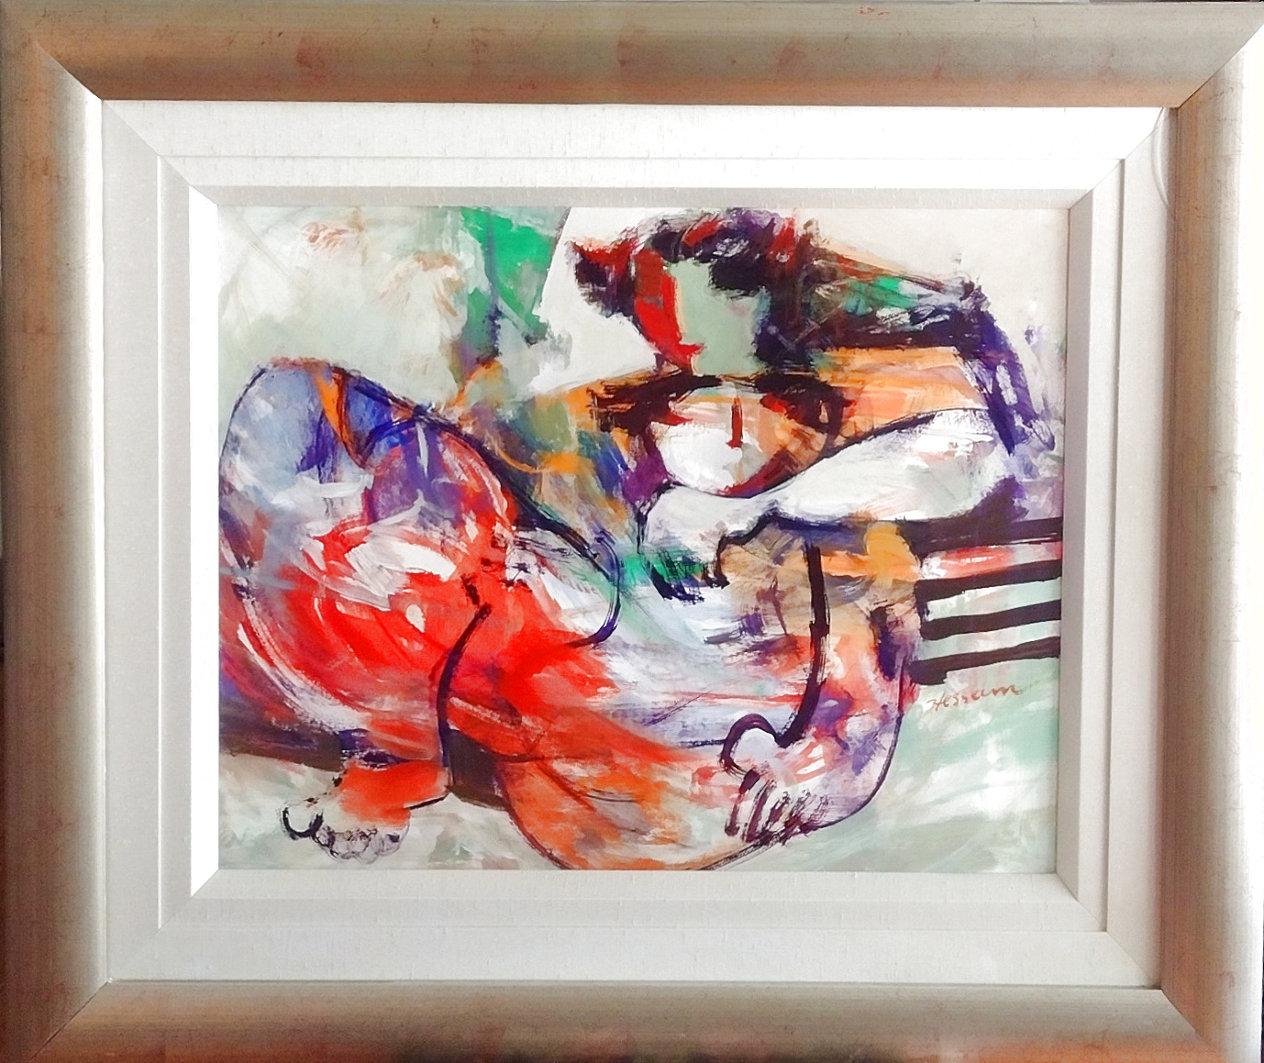 Hessam Abrishami Figurative Painting - Mother and Child - Abstract expressionist figuative original acrylic on paper